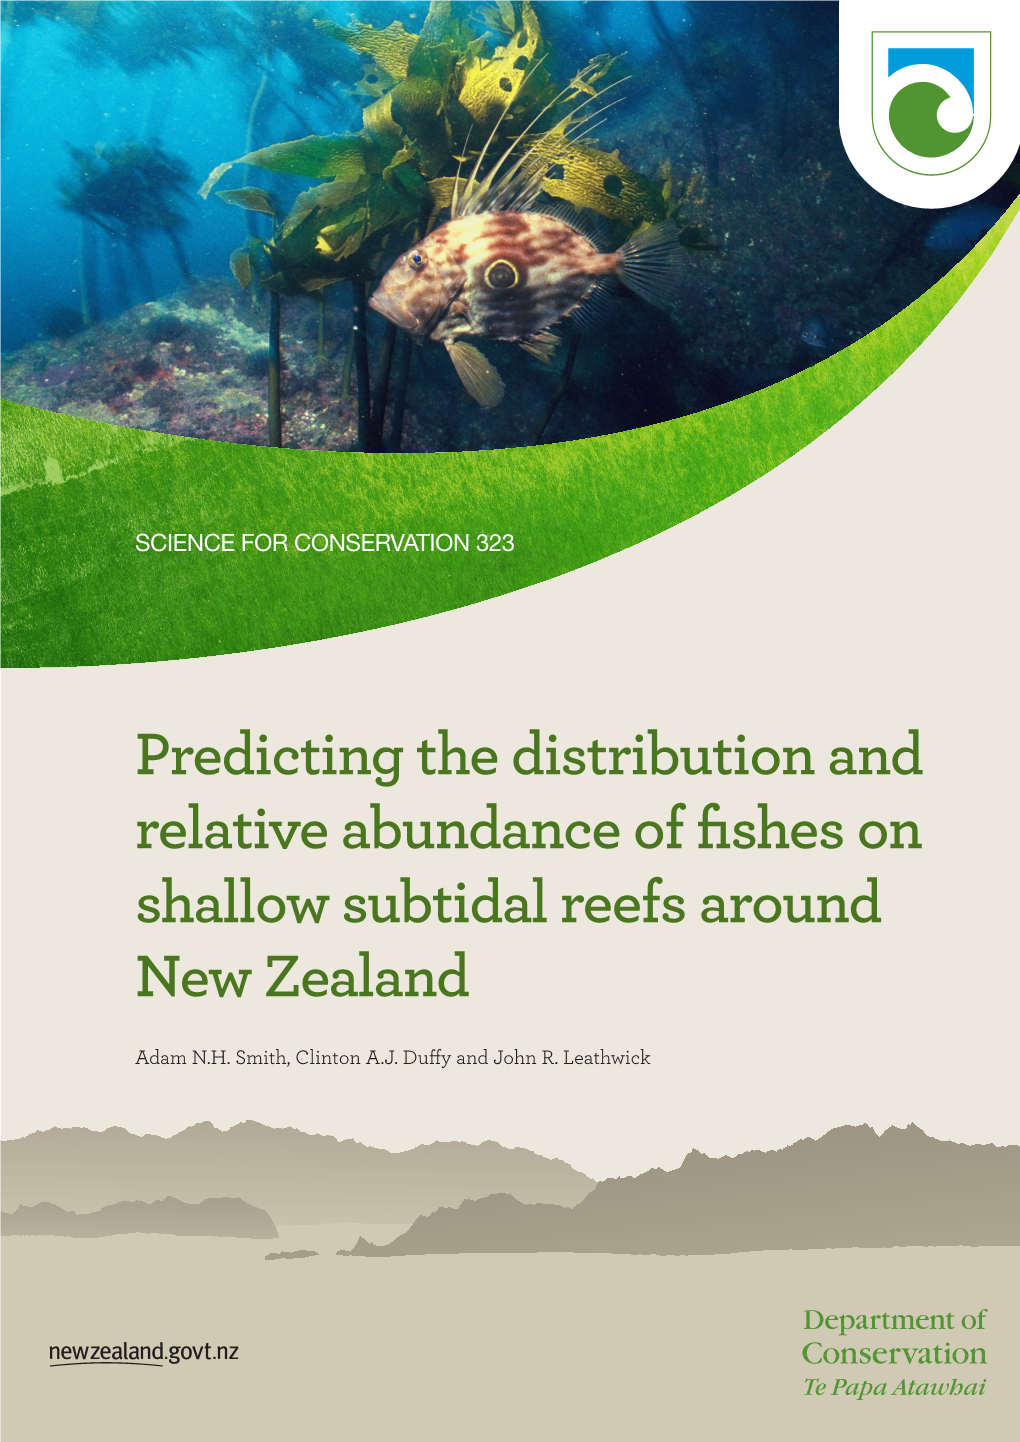 Predicting the Distribution and Relative Abundance of Fishes on Shallow Subtidal Reefs Around New Zealand